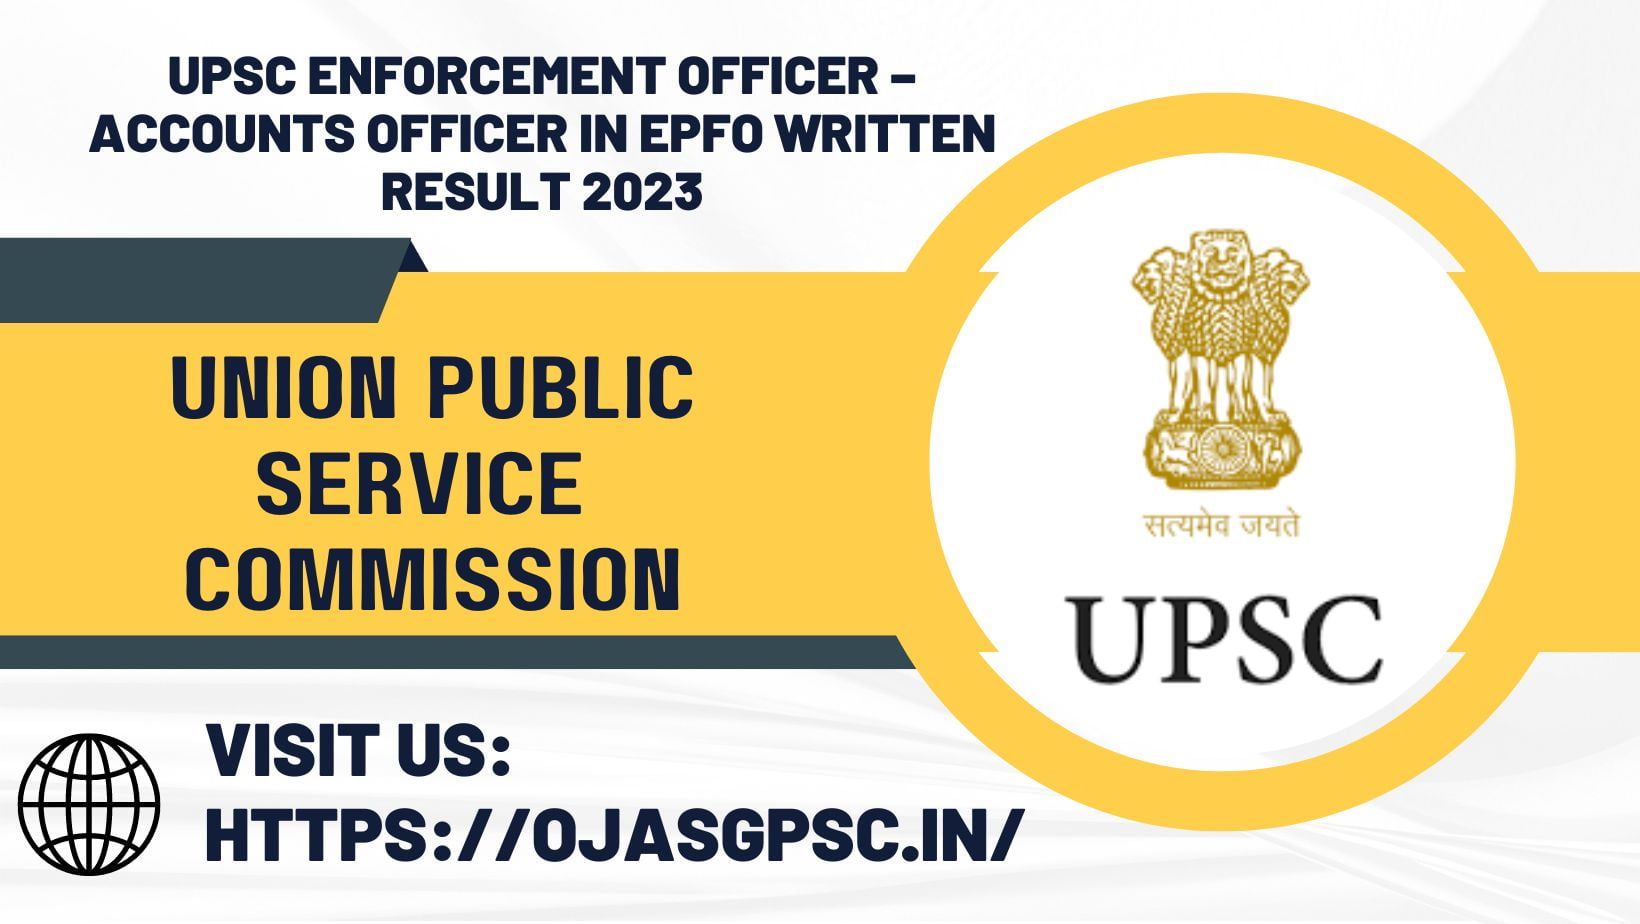 UPSC 418 Posts of Enforcement Officer – Accounts Officer in EPFO Written Result